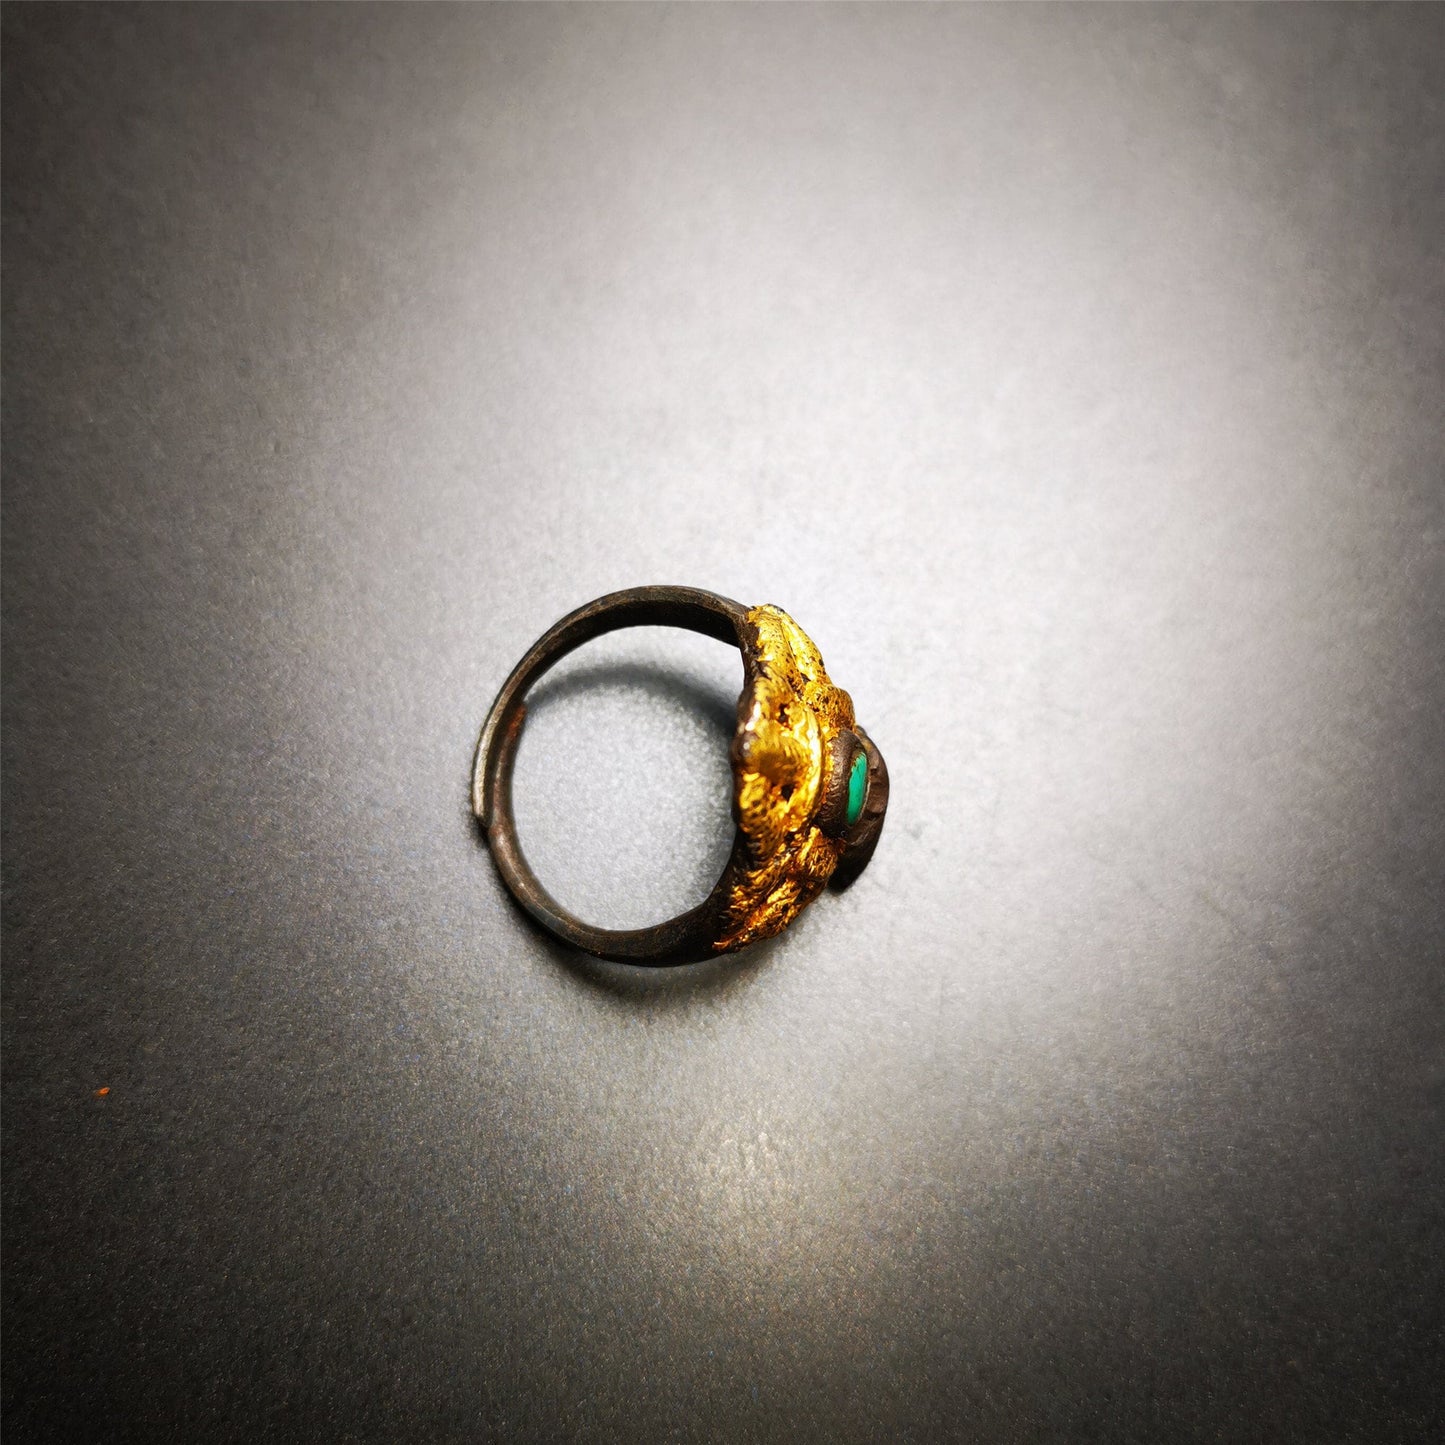 Gandhanra Unique Handcrafted Ring, Tibetan Buddhist Vajra Bell Ring,Made of Pure Gold Filled and Silver Filled,Protection Jewelry